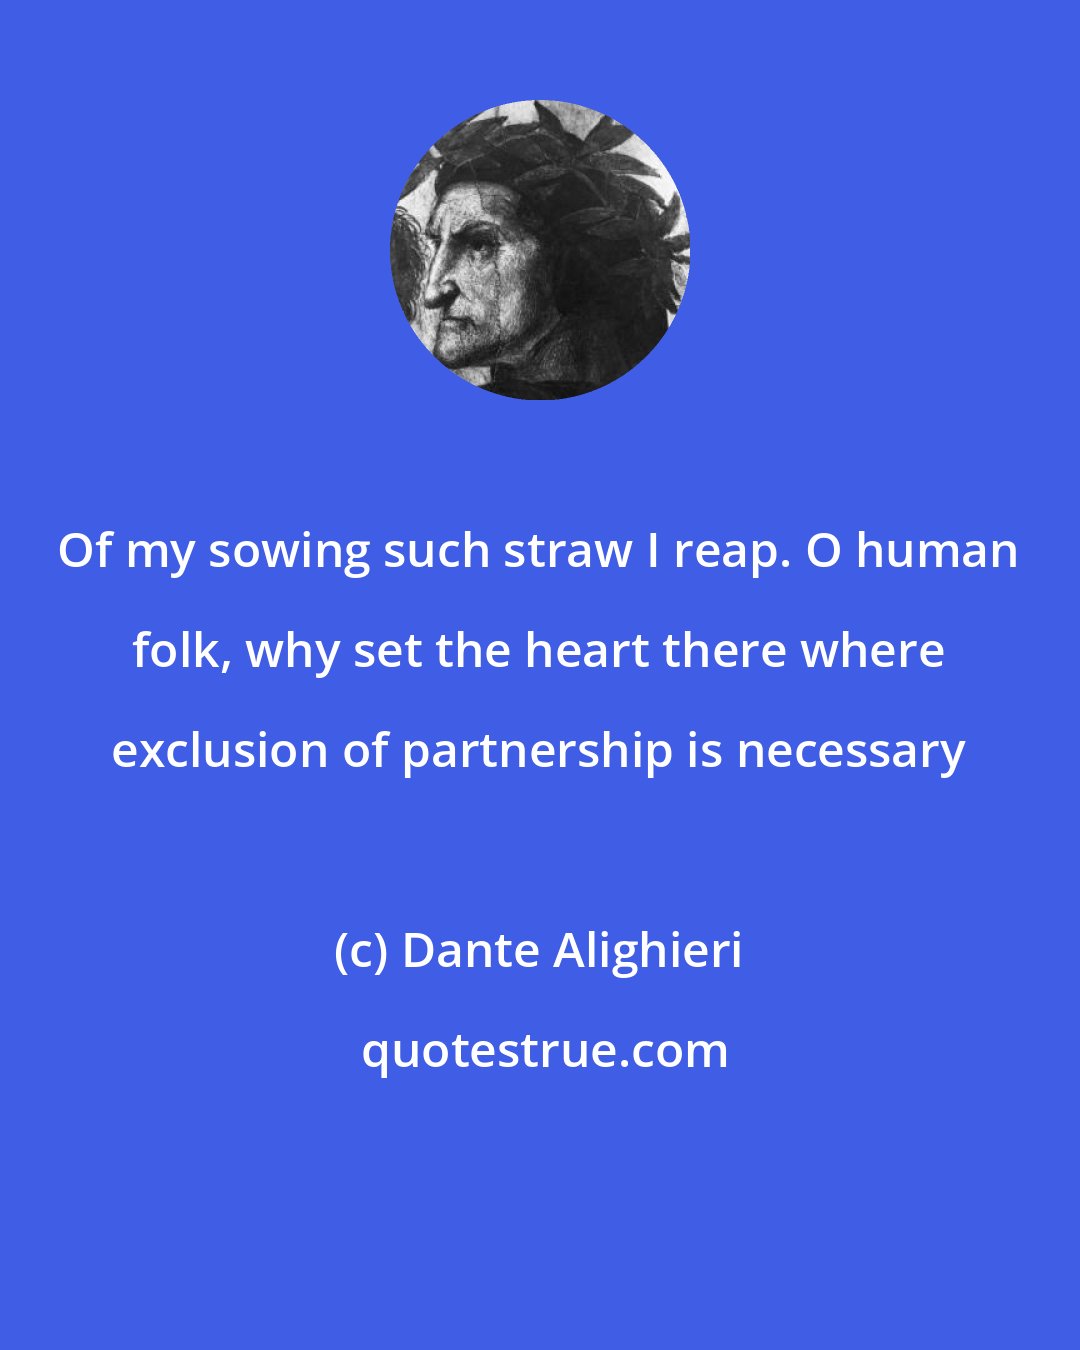 Dante Alighieri: Of my sowing such straw I reap. O human folk, why set the heart there where exclusion of partnership is necessary